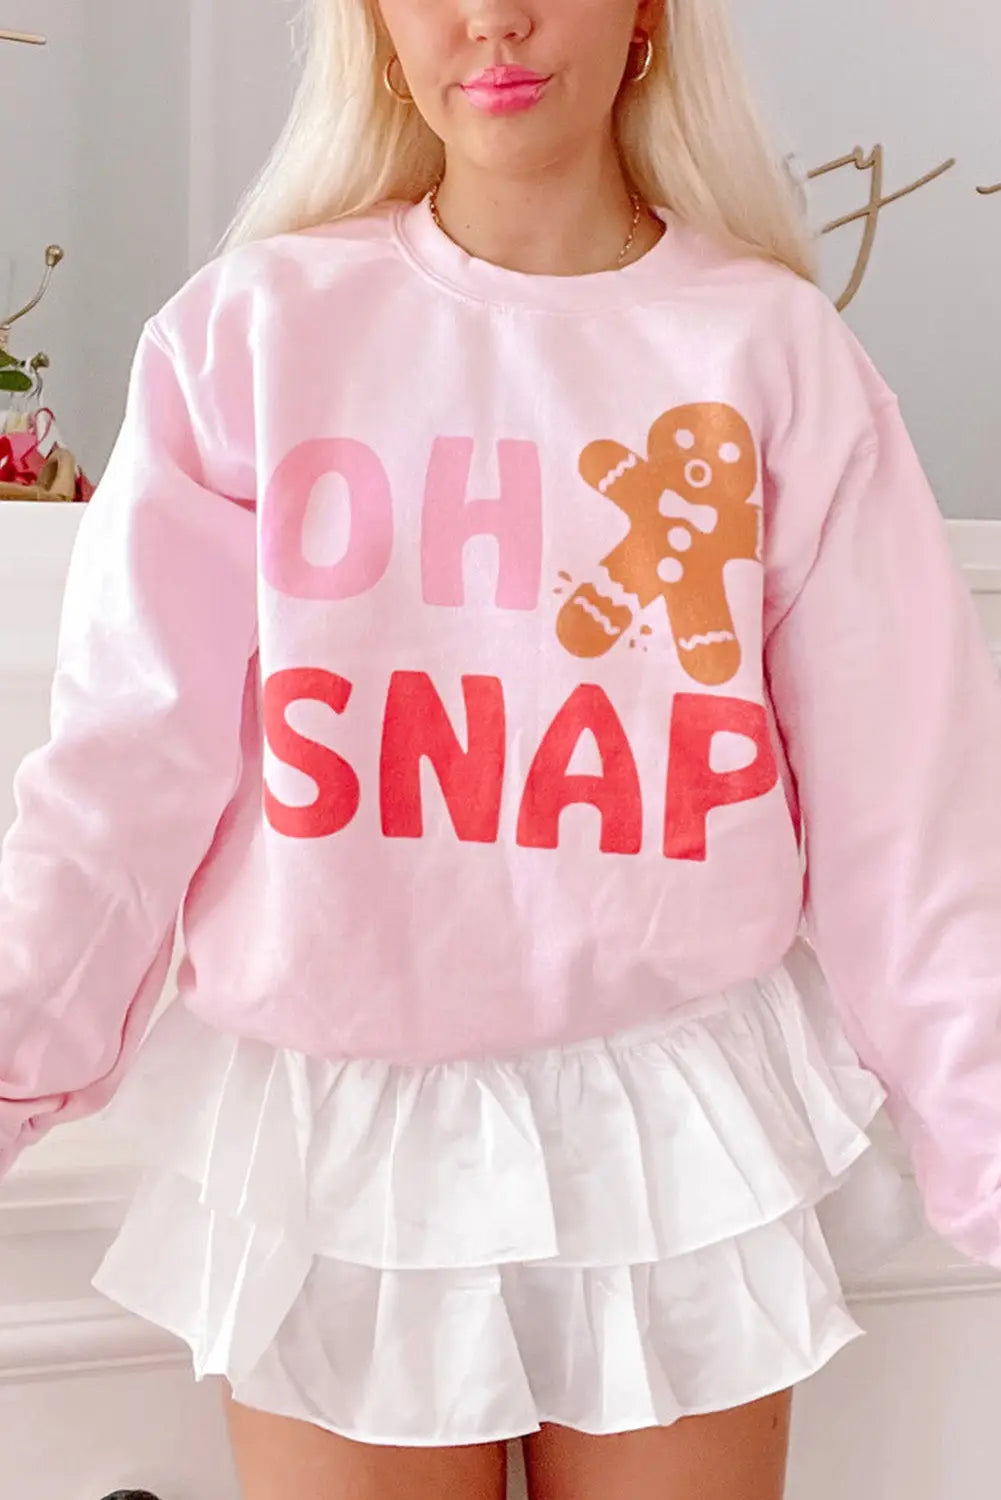 Pink oh snap gingerbread man christmas pullover sweatshirt - 2xl / 70% polyester + 30% cotton - graphic sweatshirts